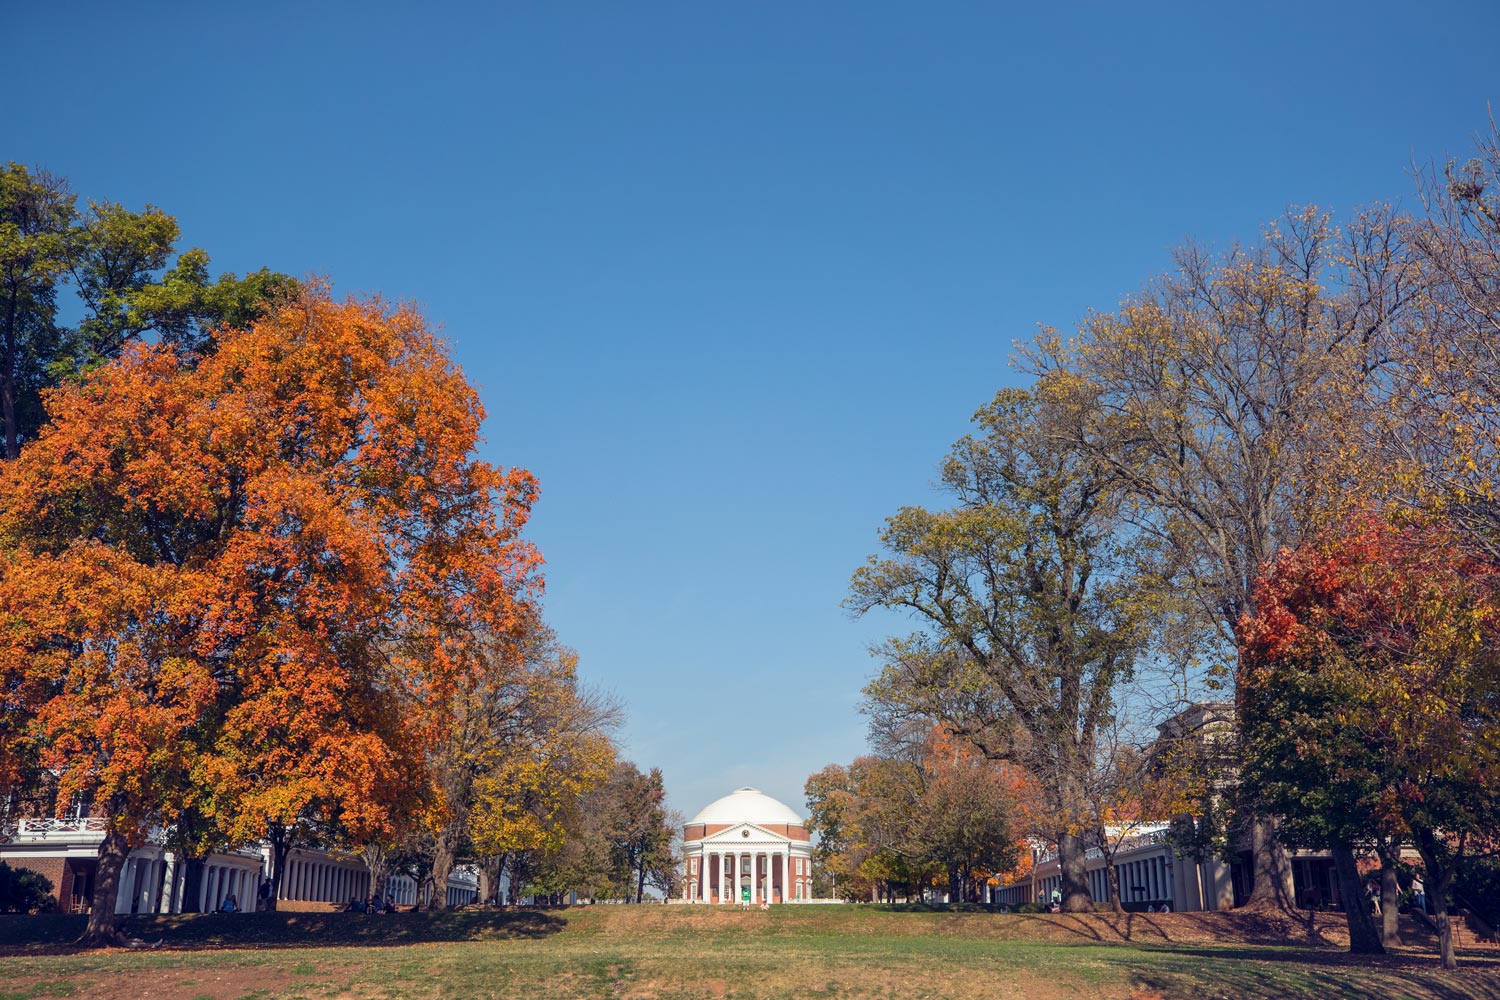 Rotunda from the lawn with trees turning fall colors